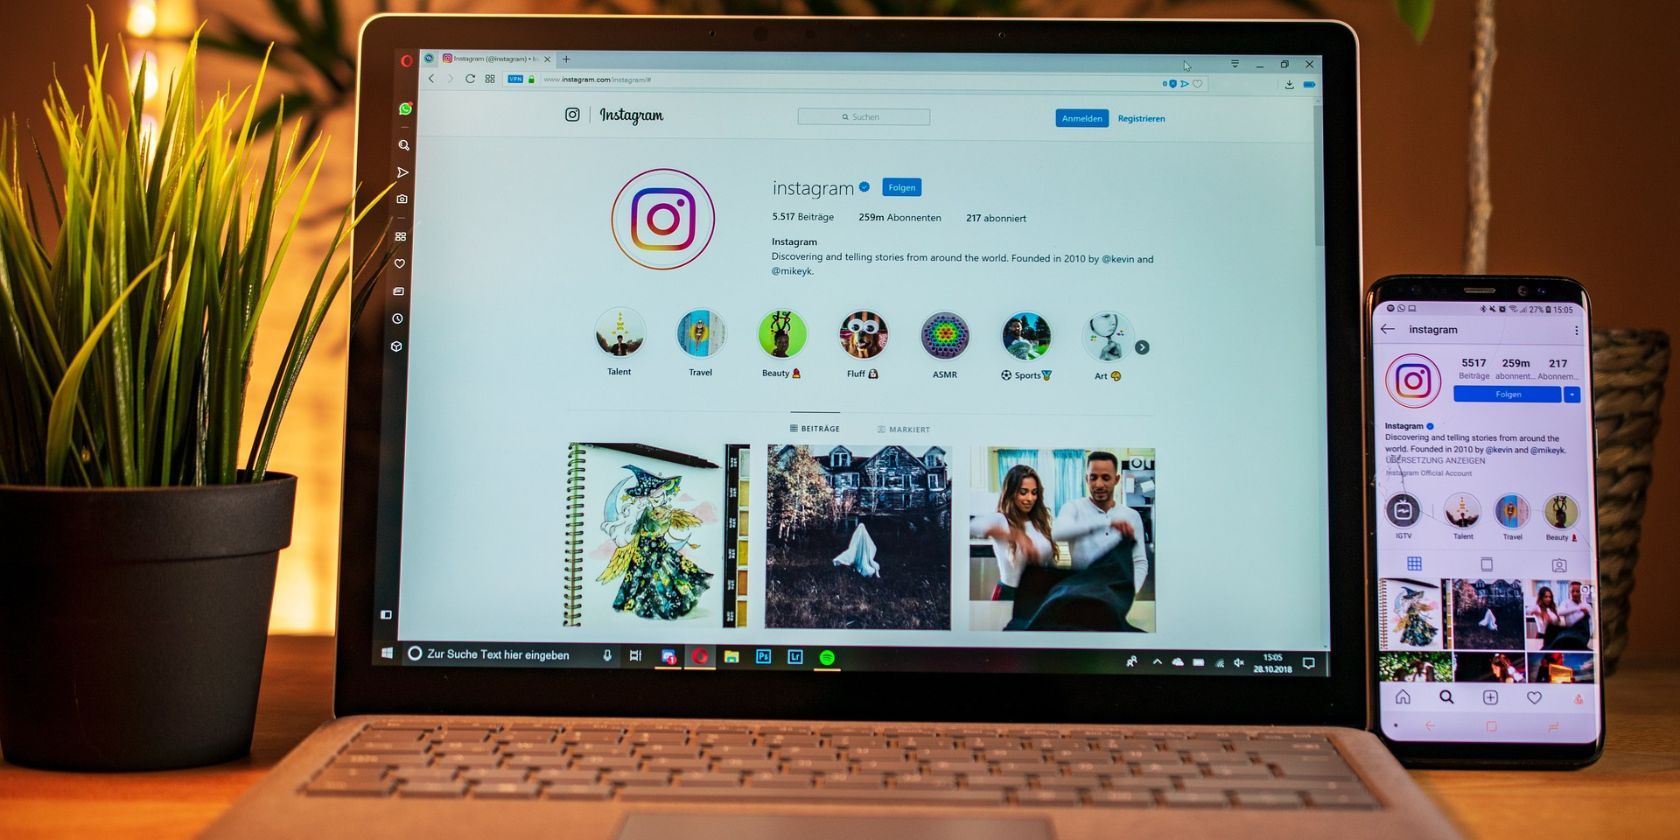 Instagram opened on laptop and mobile